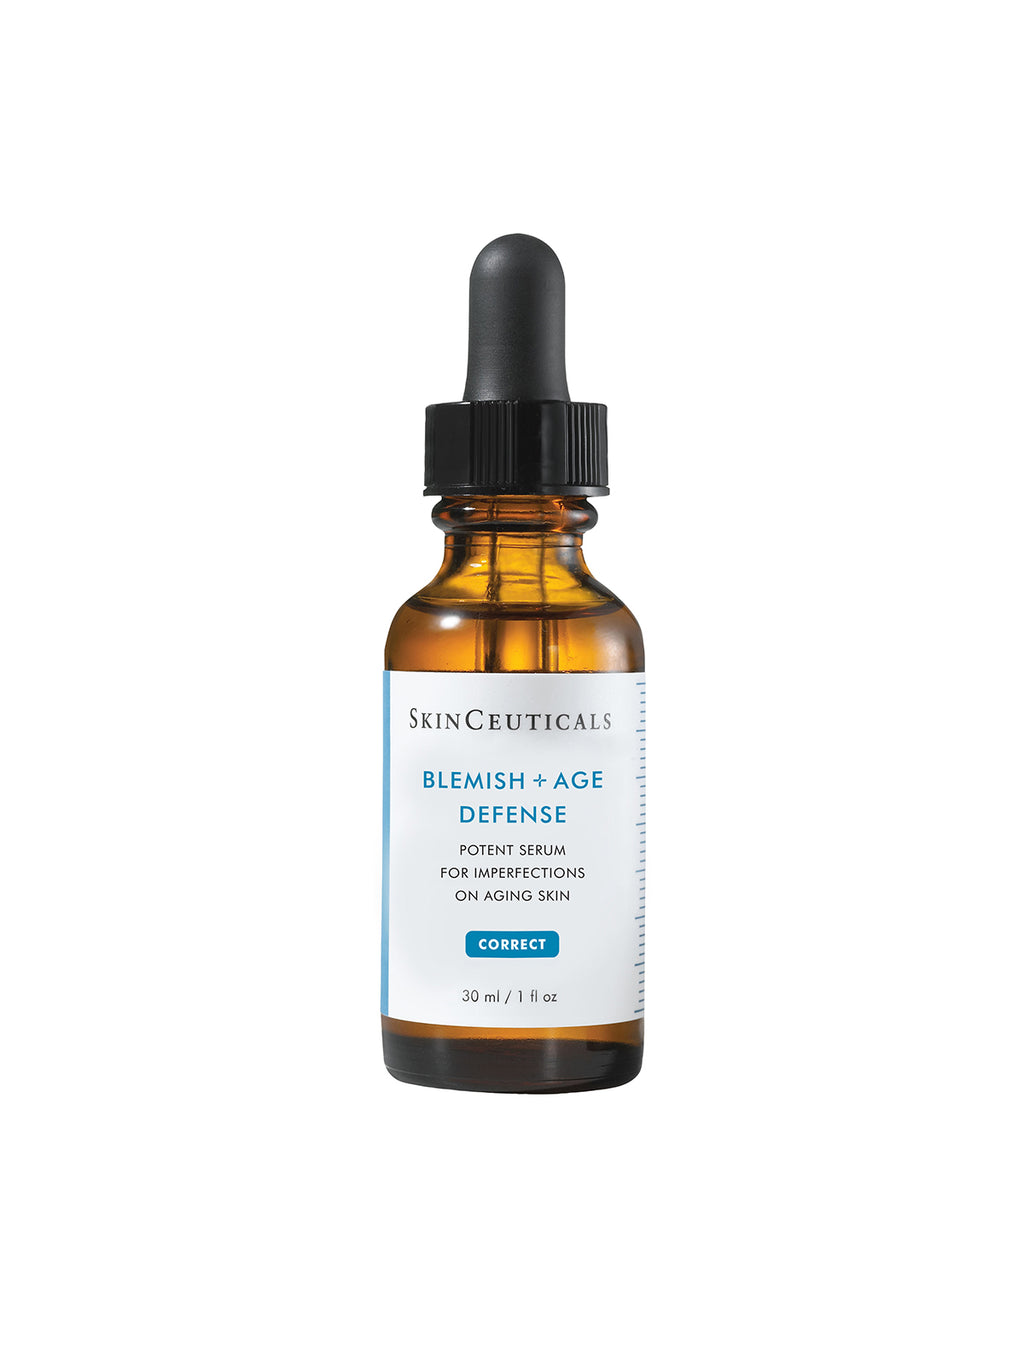 LHA Serum (Previously known as Blemish + Age Defense)